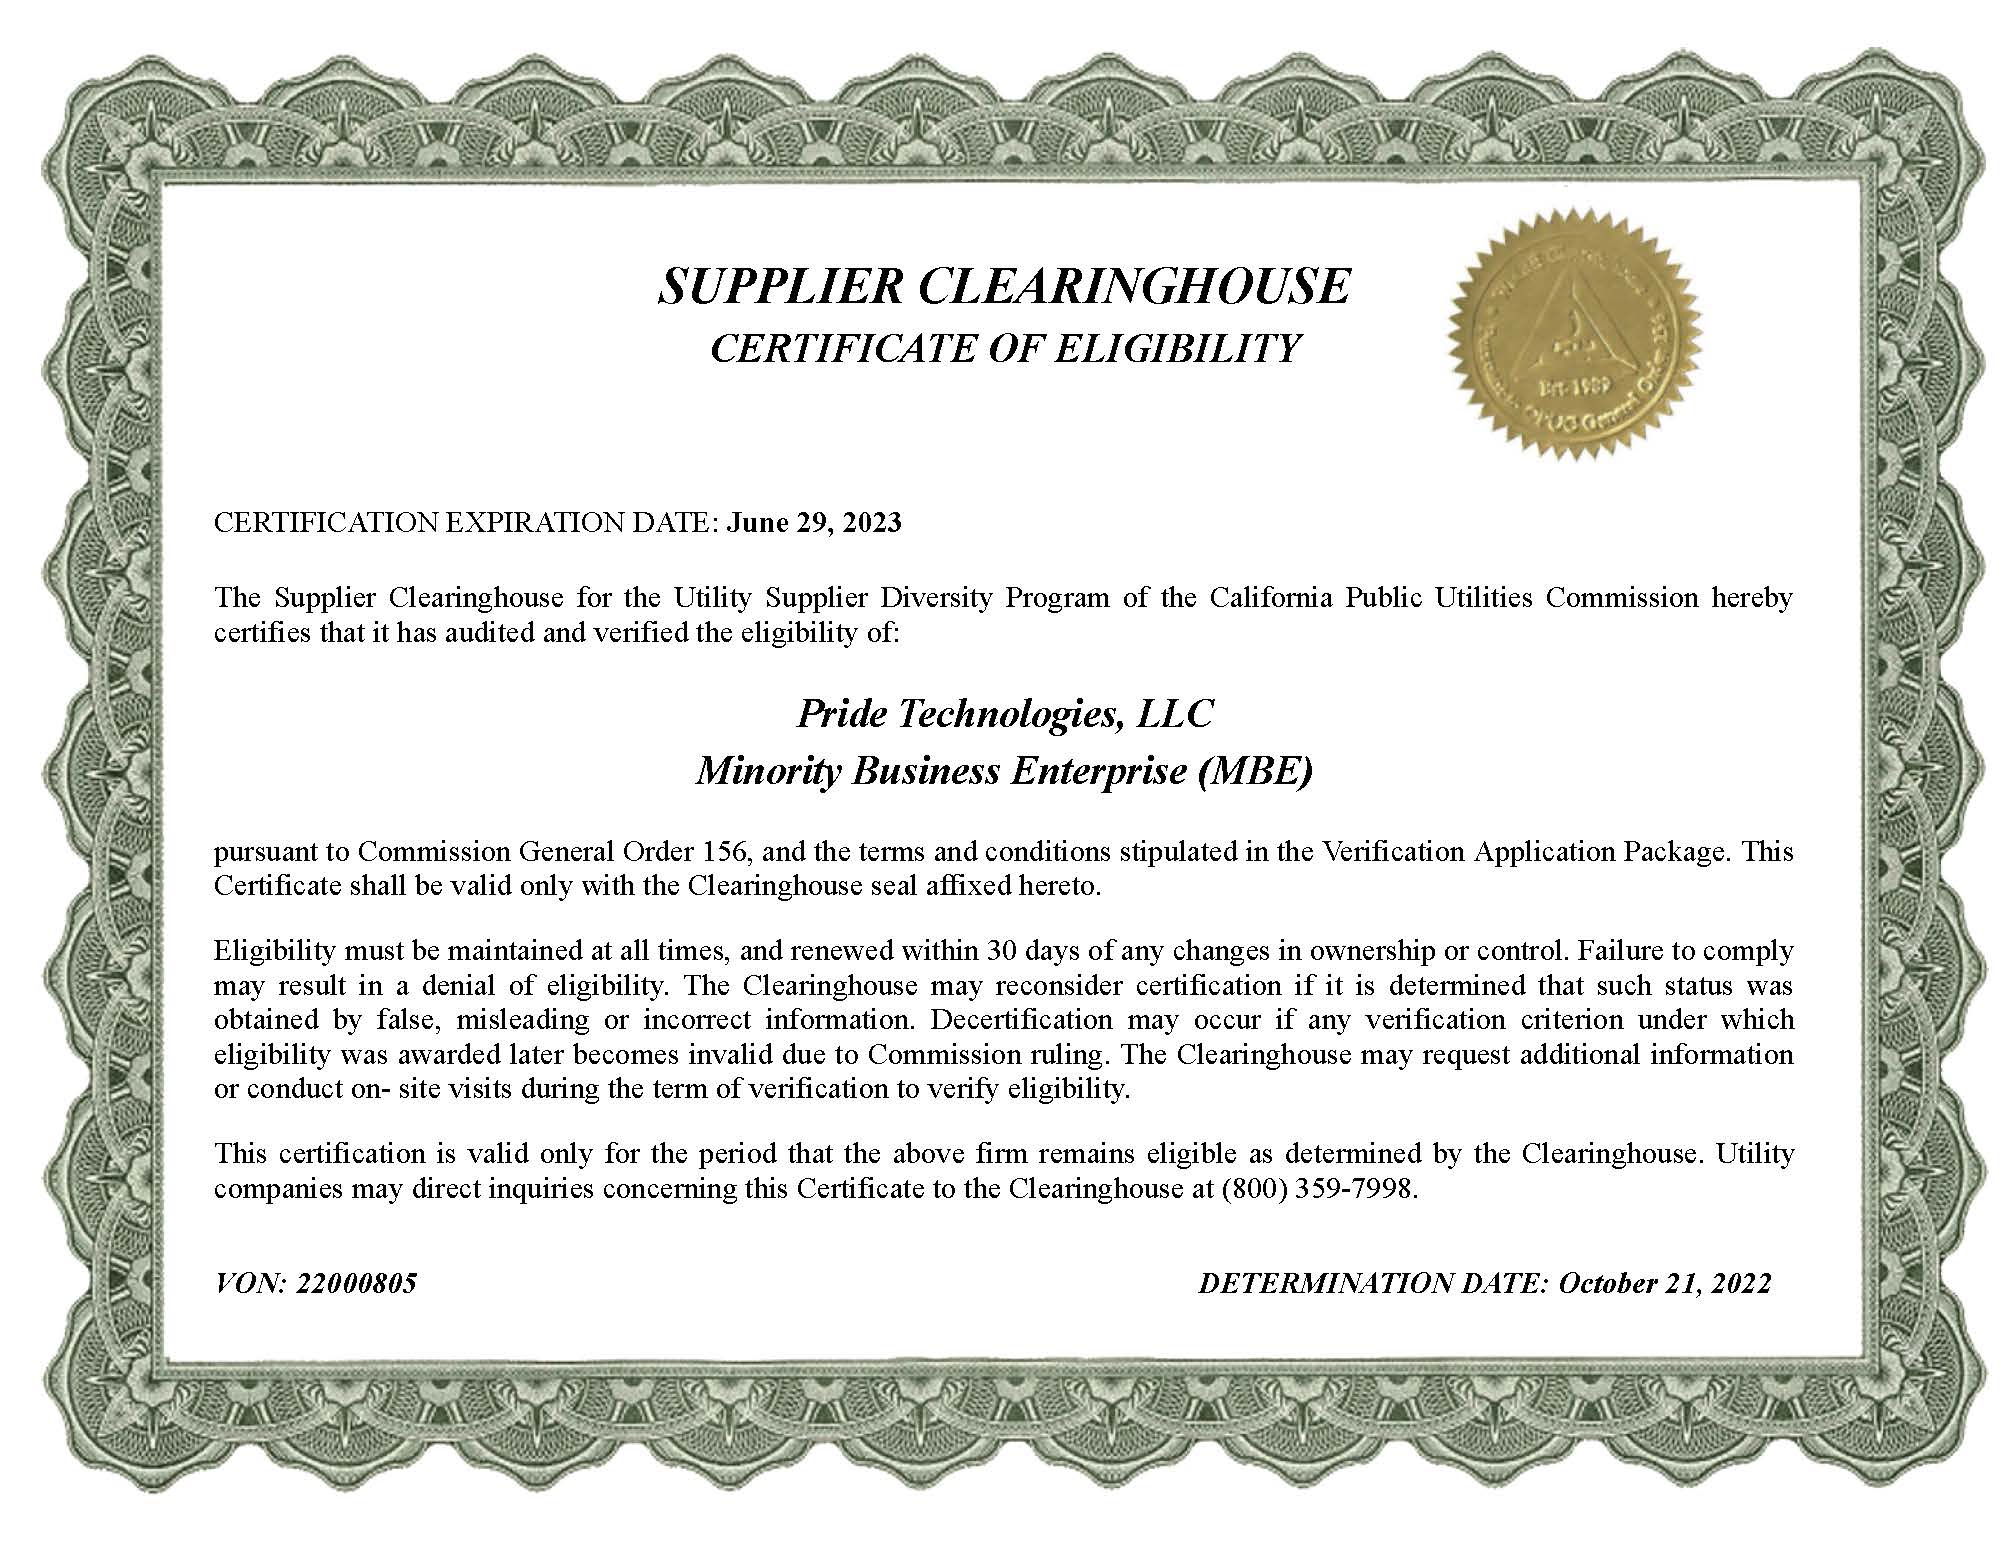 Certification of Supplier Clearinghouse